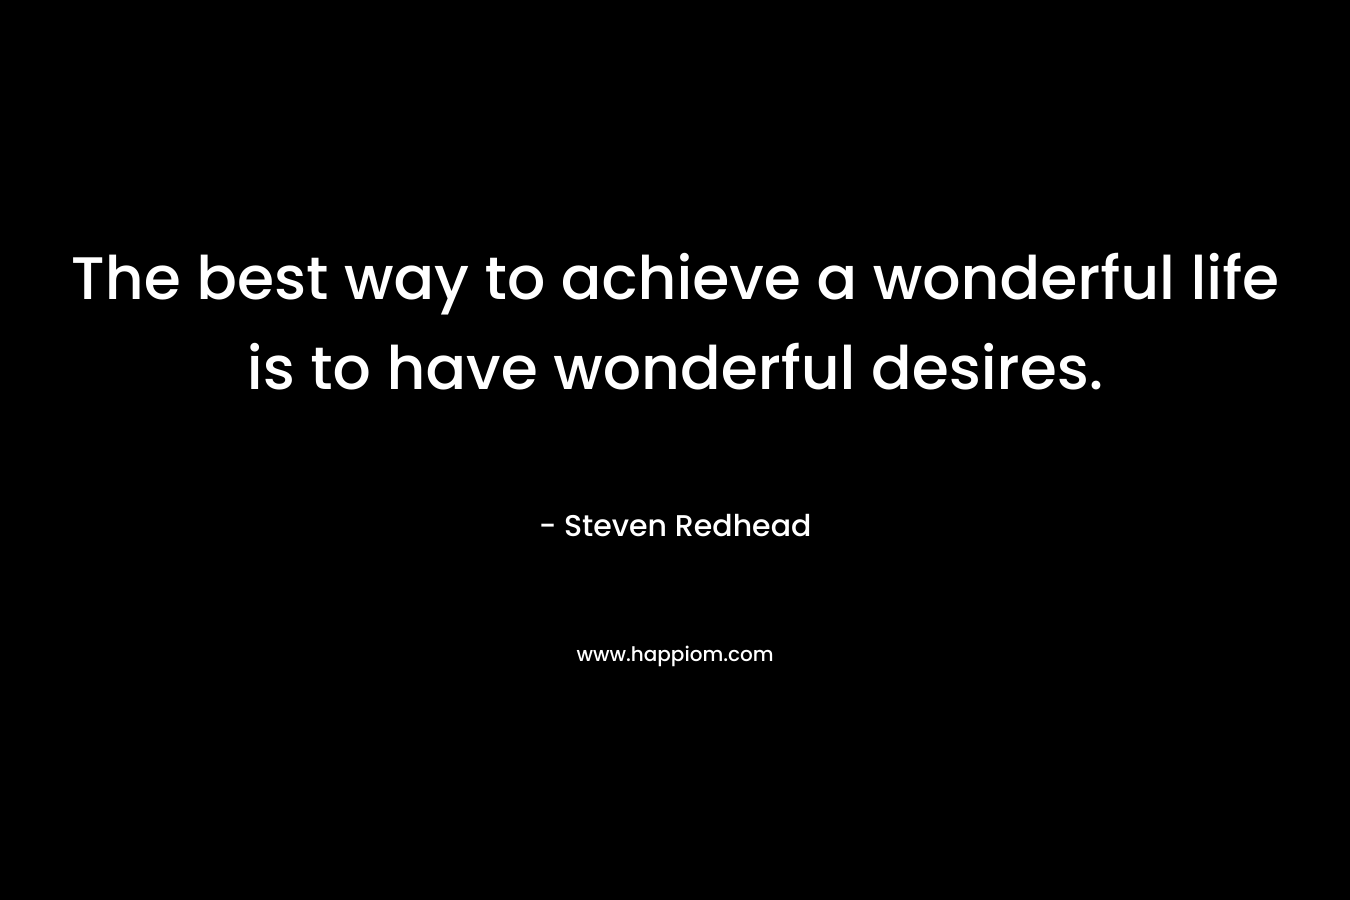 The best way to achieve a wonderful life is to have wonderful desires.